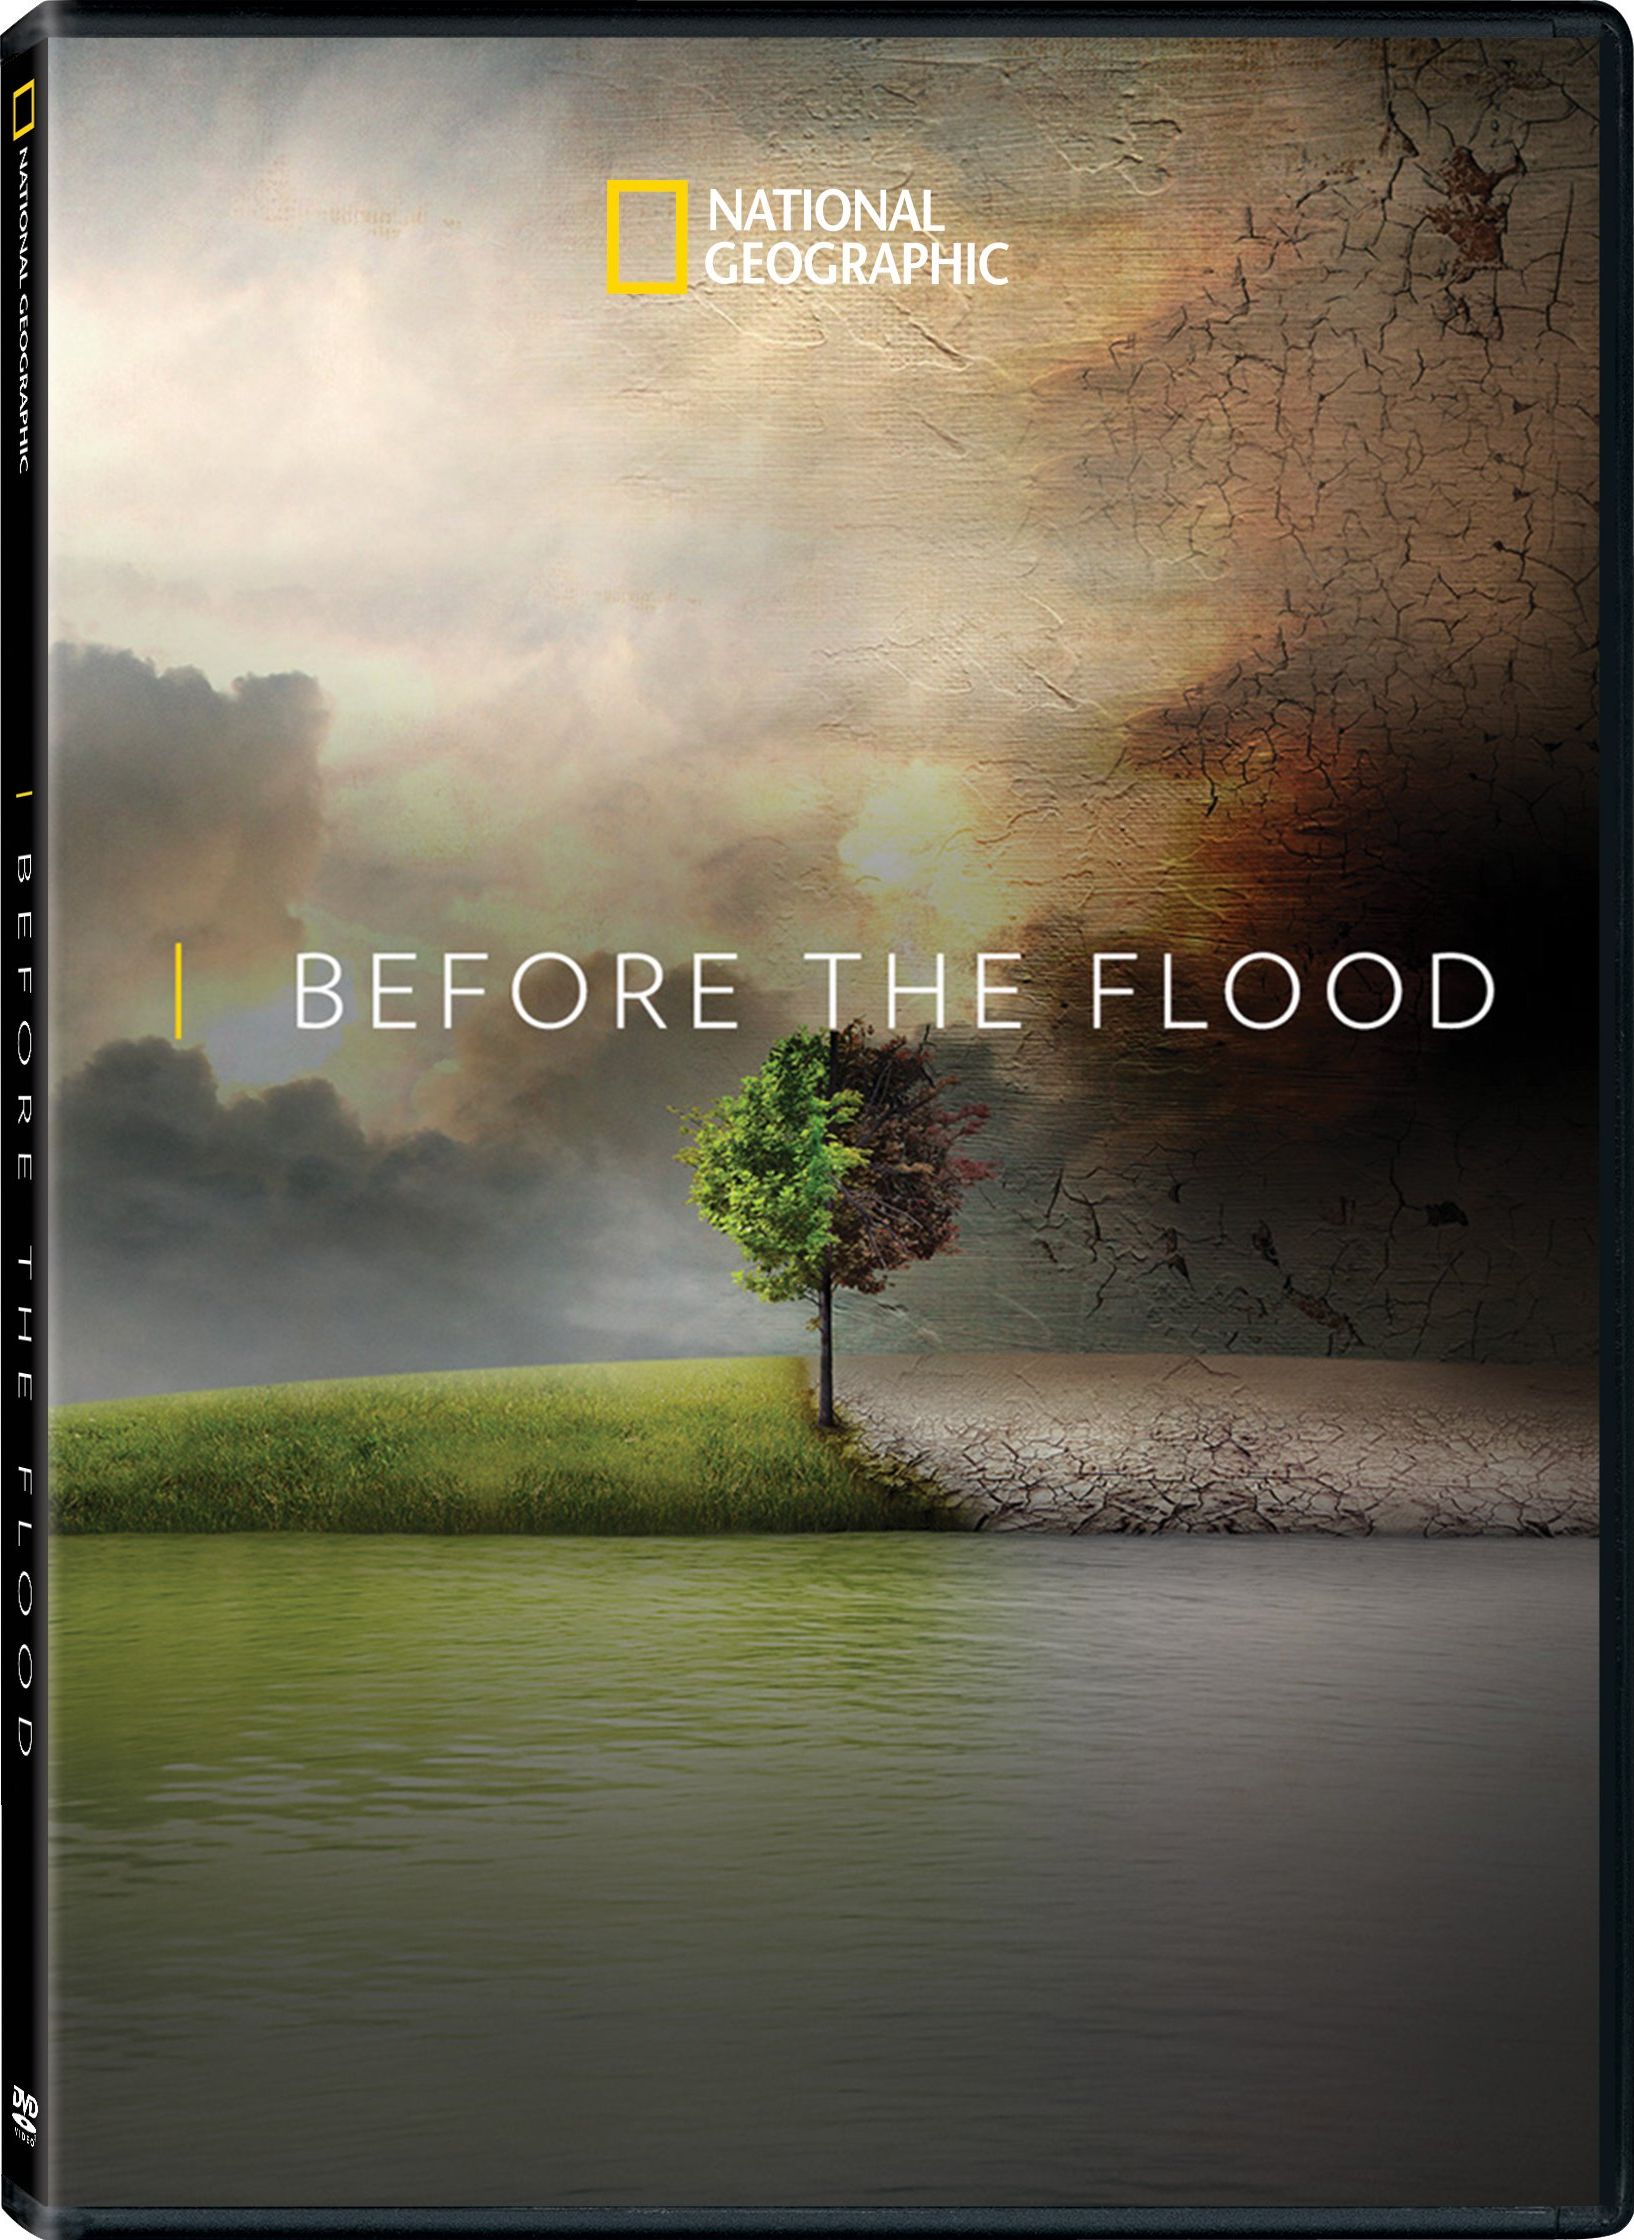 Before the Flood DVD Release Date April 18, 20171634 x 2240